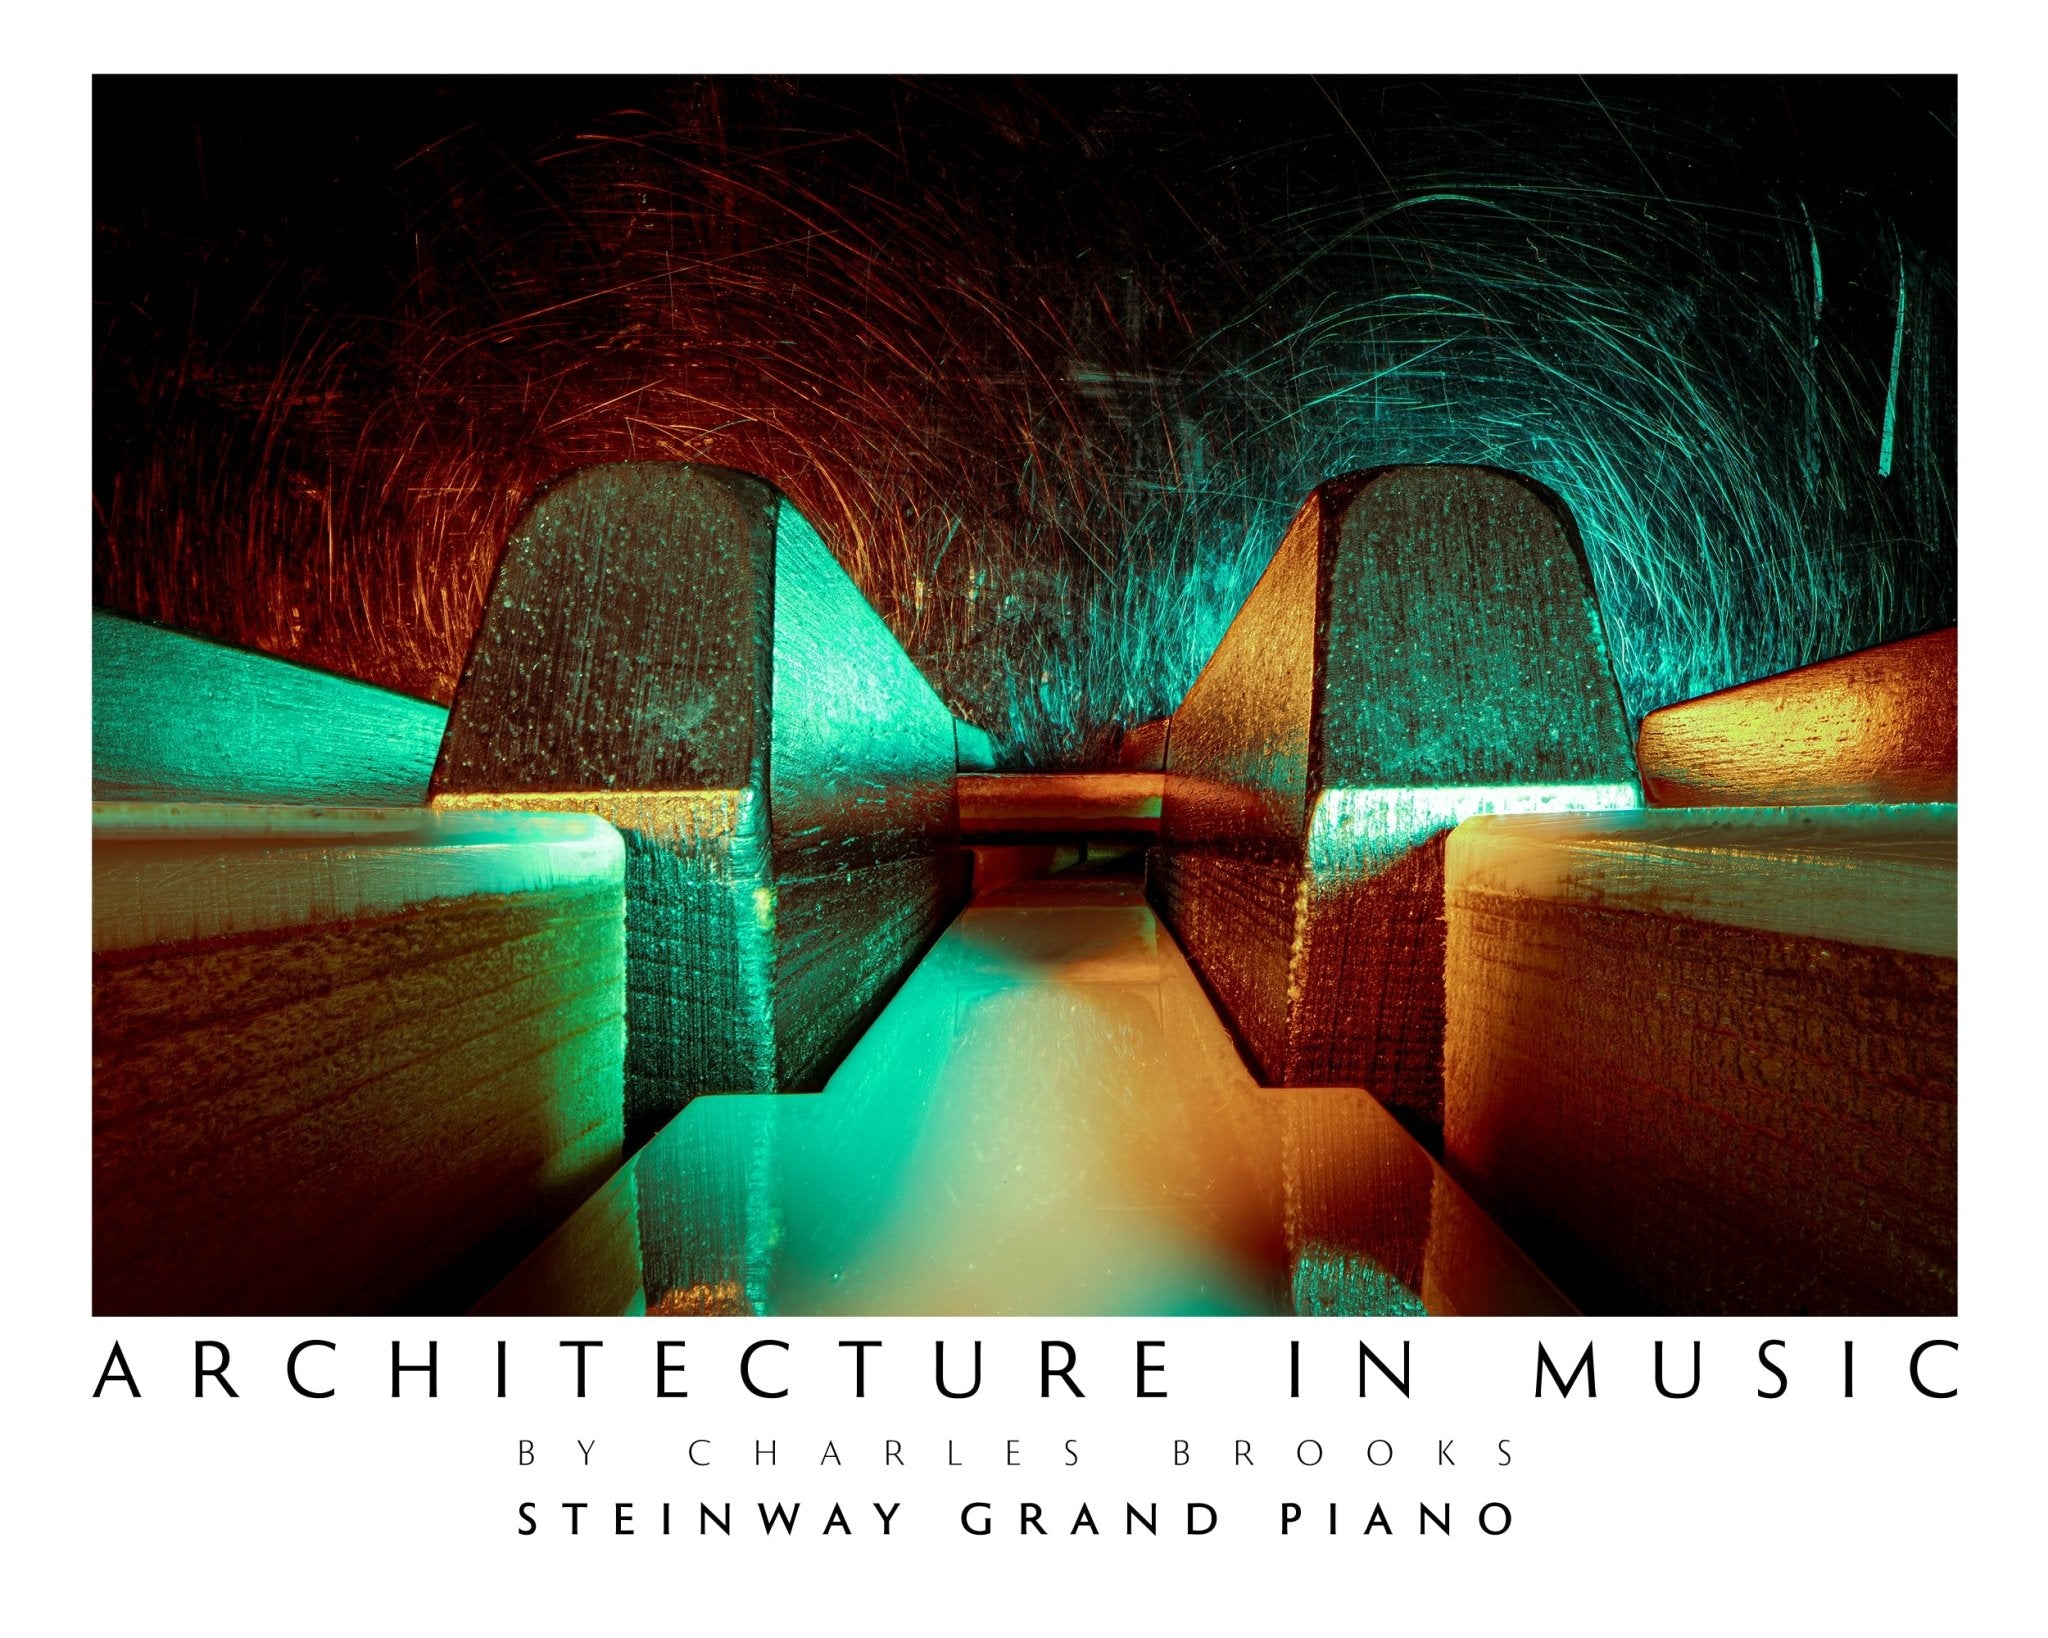 Photo of The Exquisite Architecture of Steinway, Part 4. High Quality Poster - Giclée Poster Print - Architecture In Music